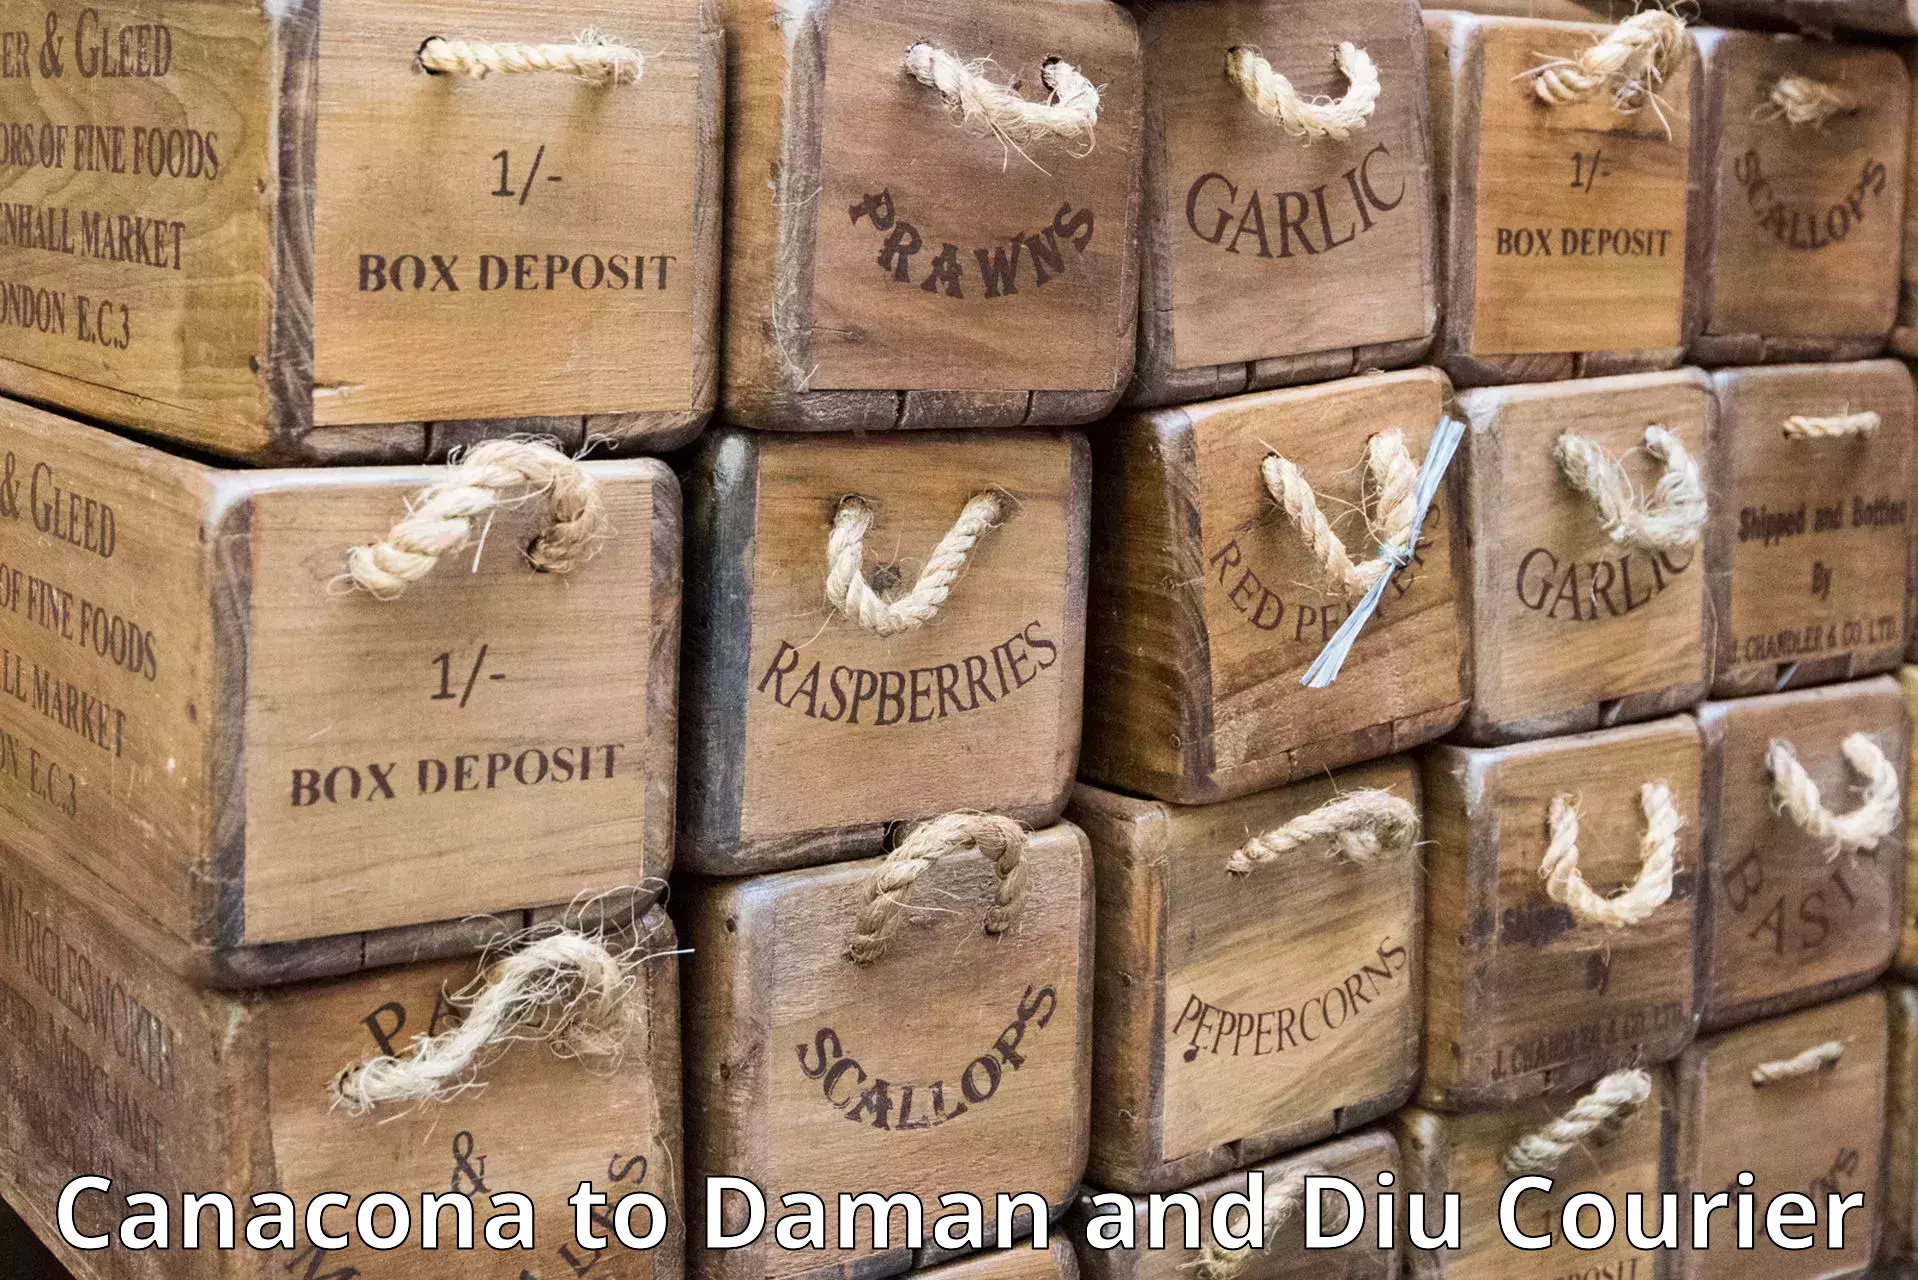 Residential courier service in Canacona to Daman and Diu